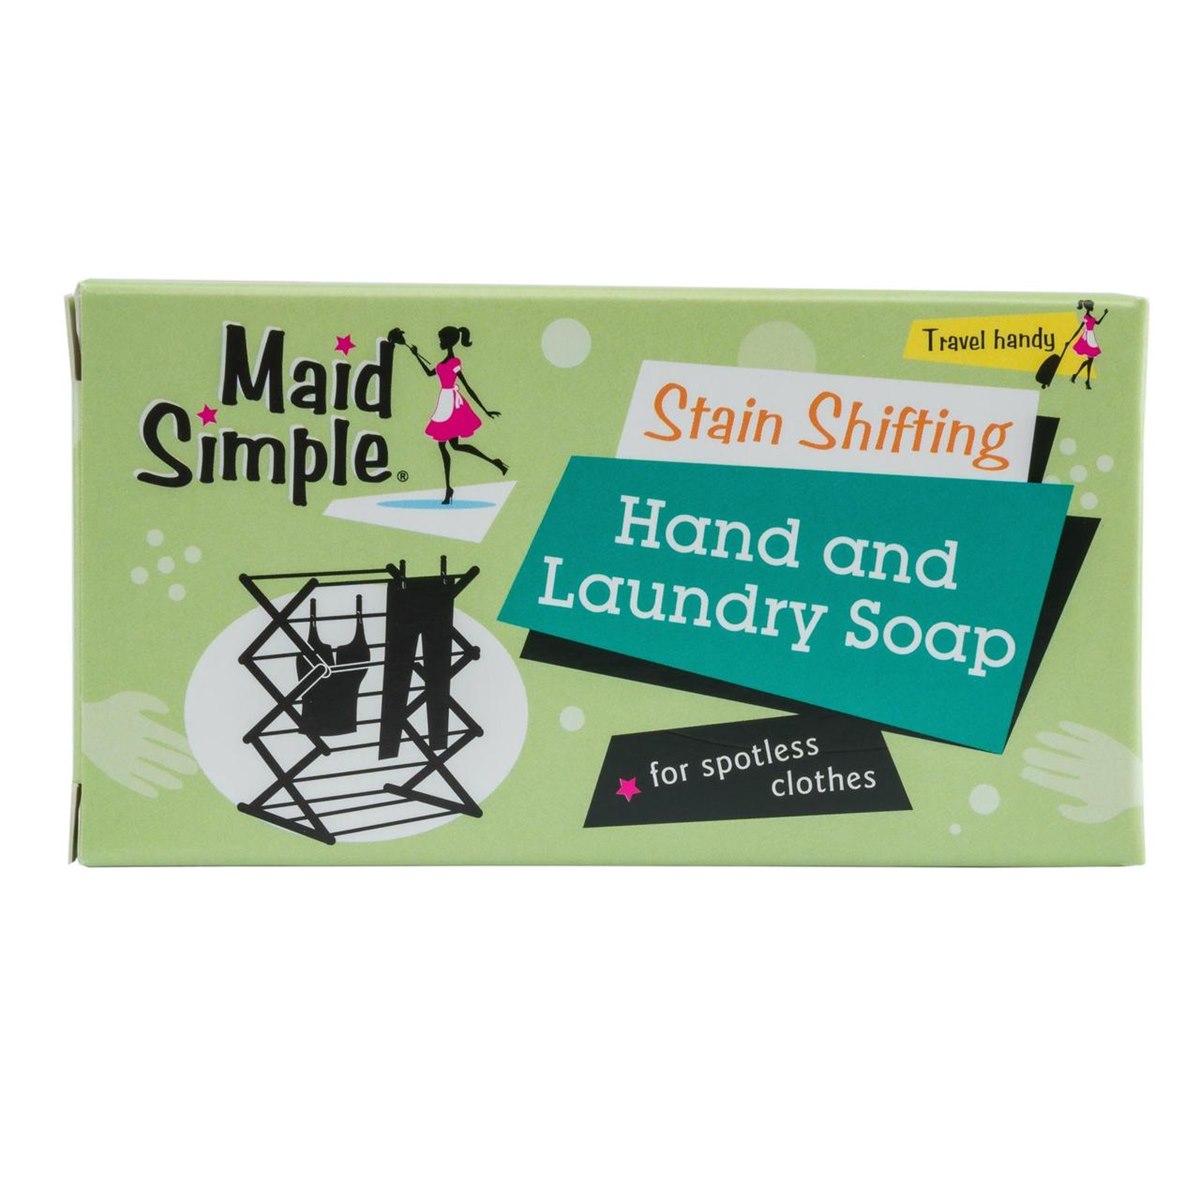 Where to buy Maid Simple Laundry Soap